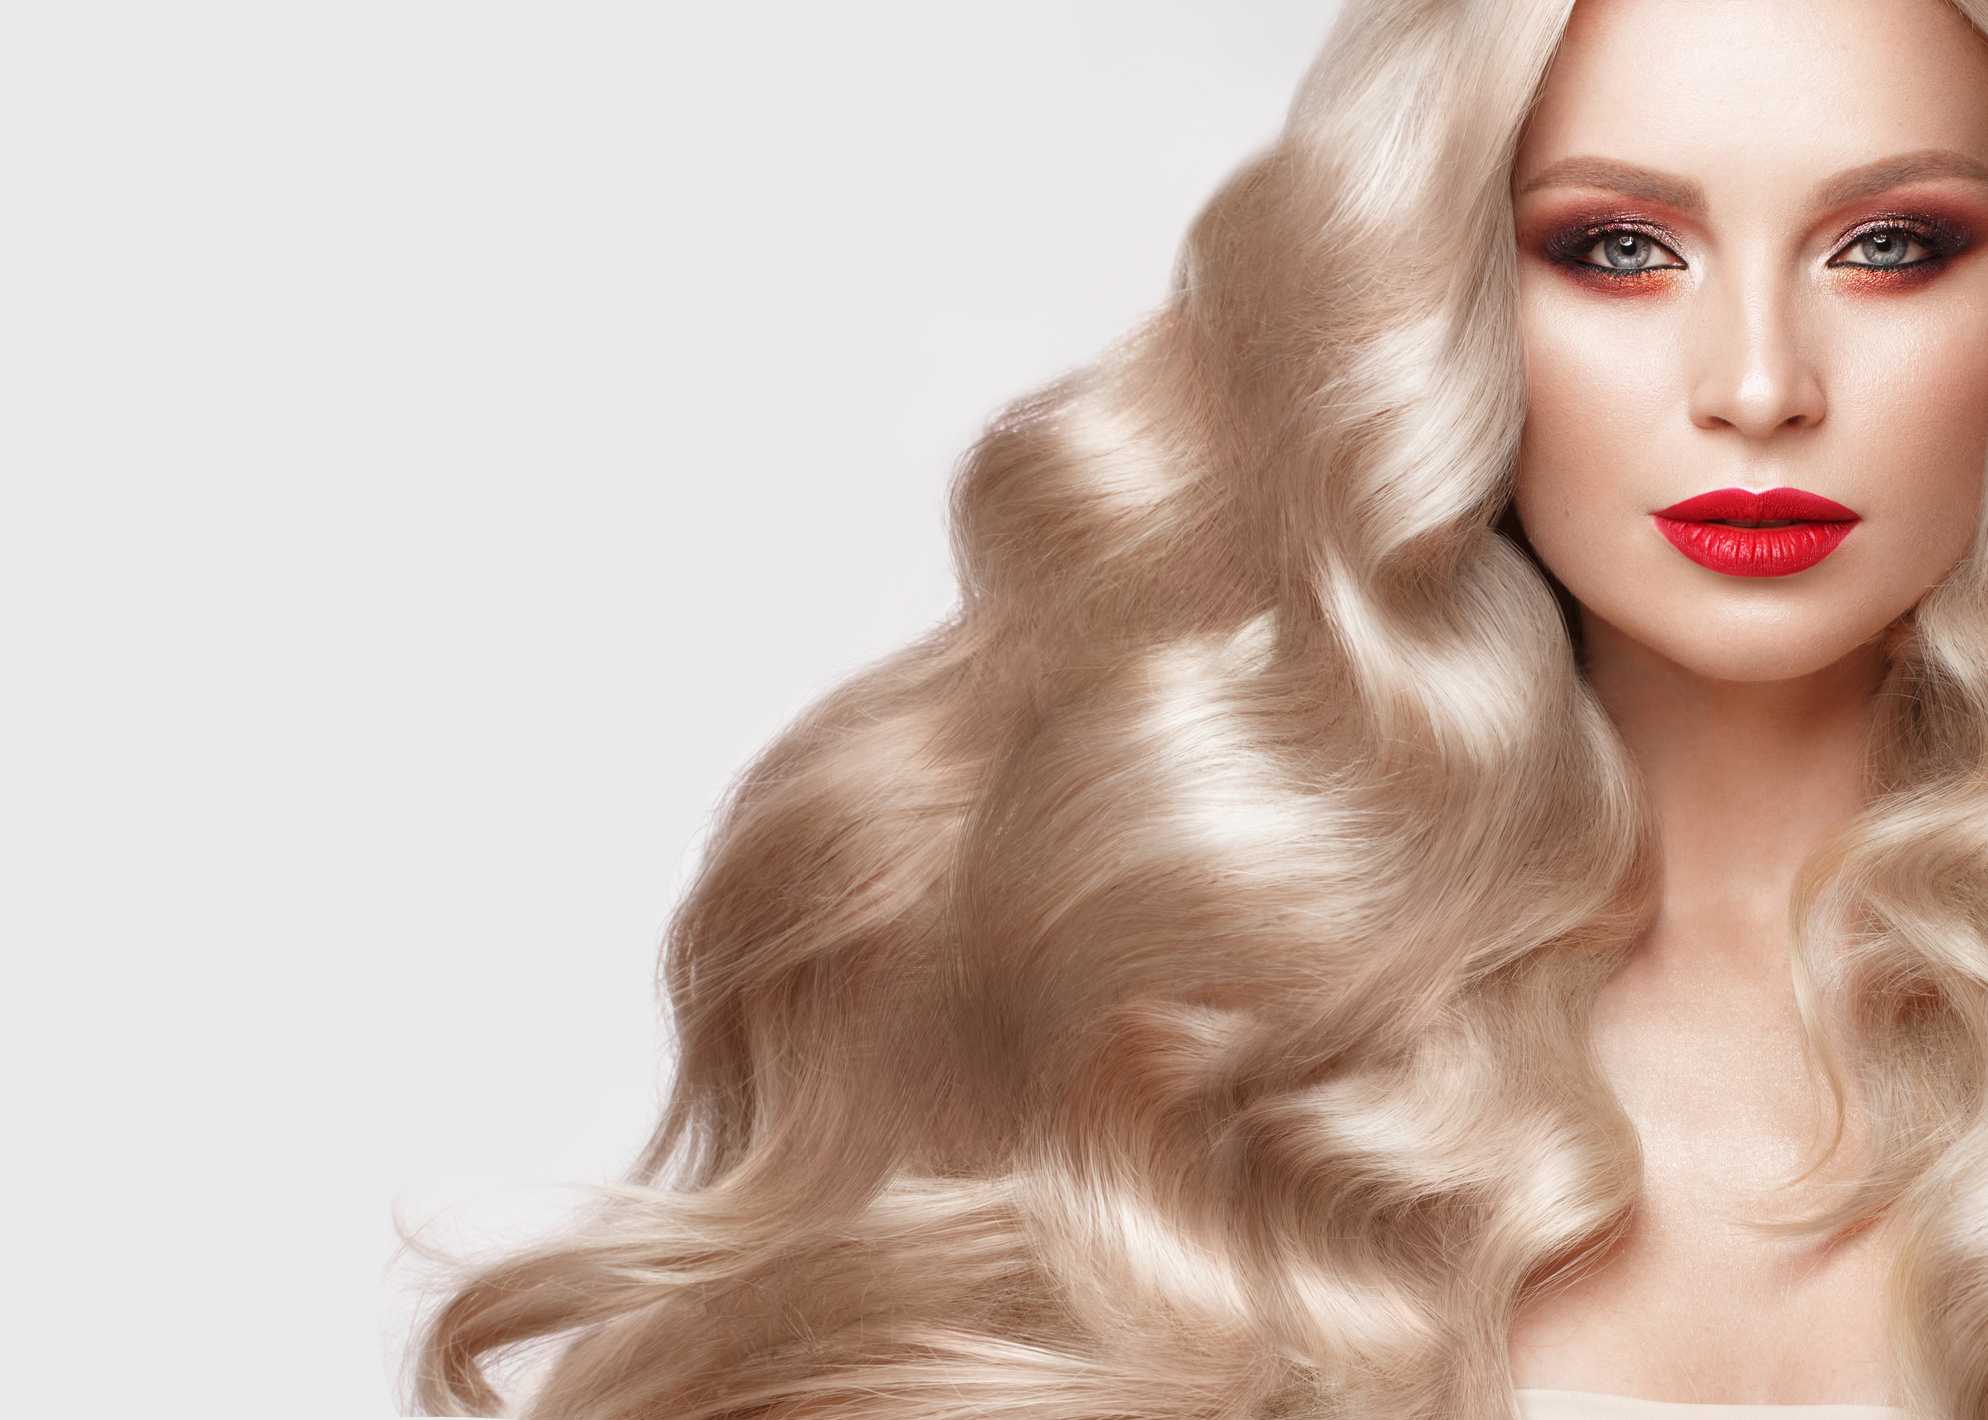 Beautiful Blonde in a Hollywood Manner with Curls, Natural Makeup and Red Lips. Beauty Face and Hair.